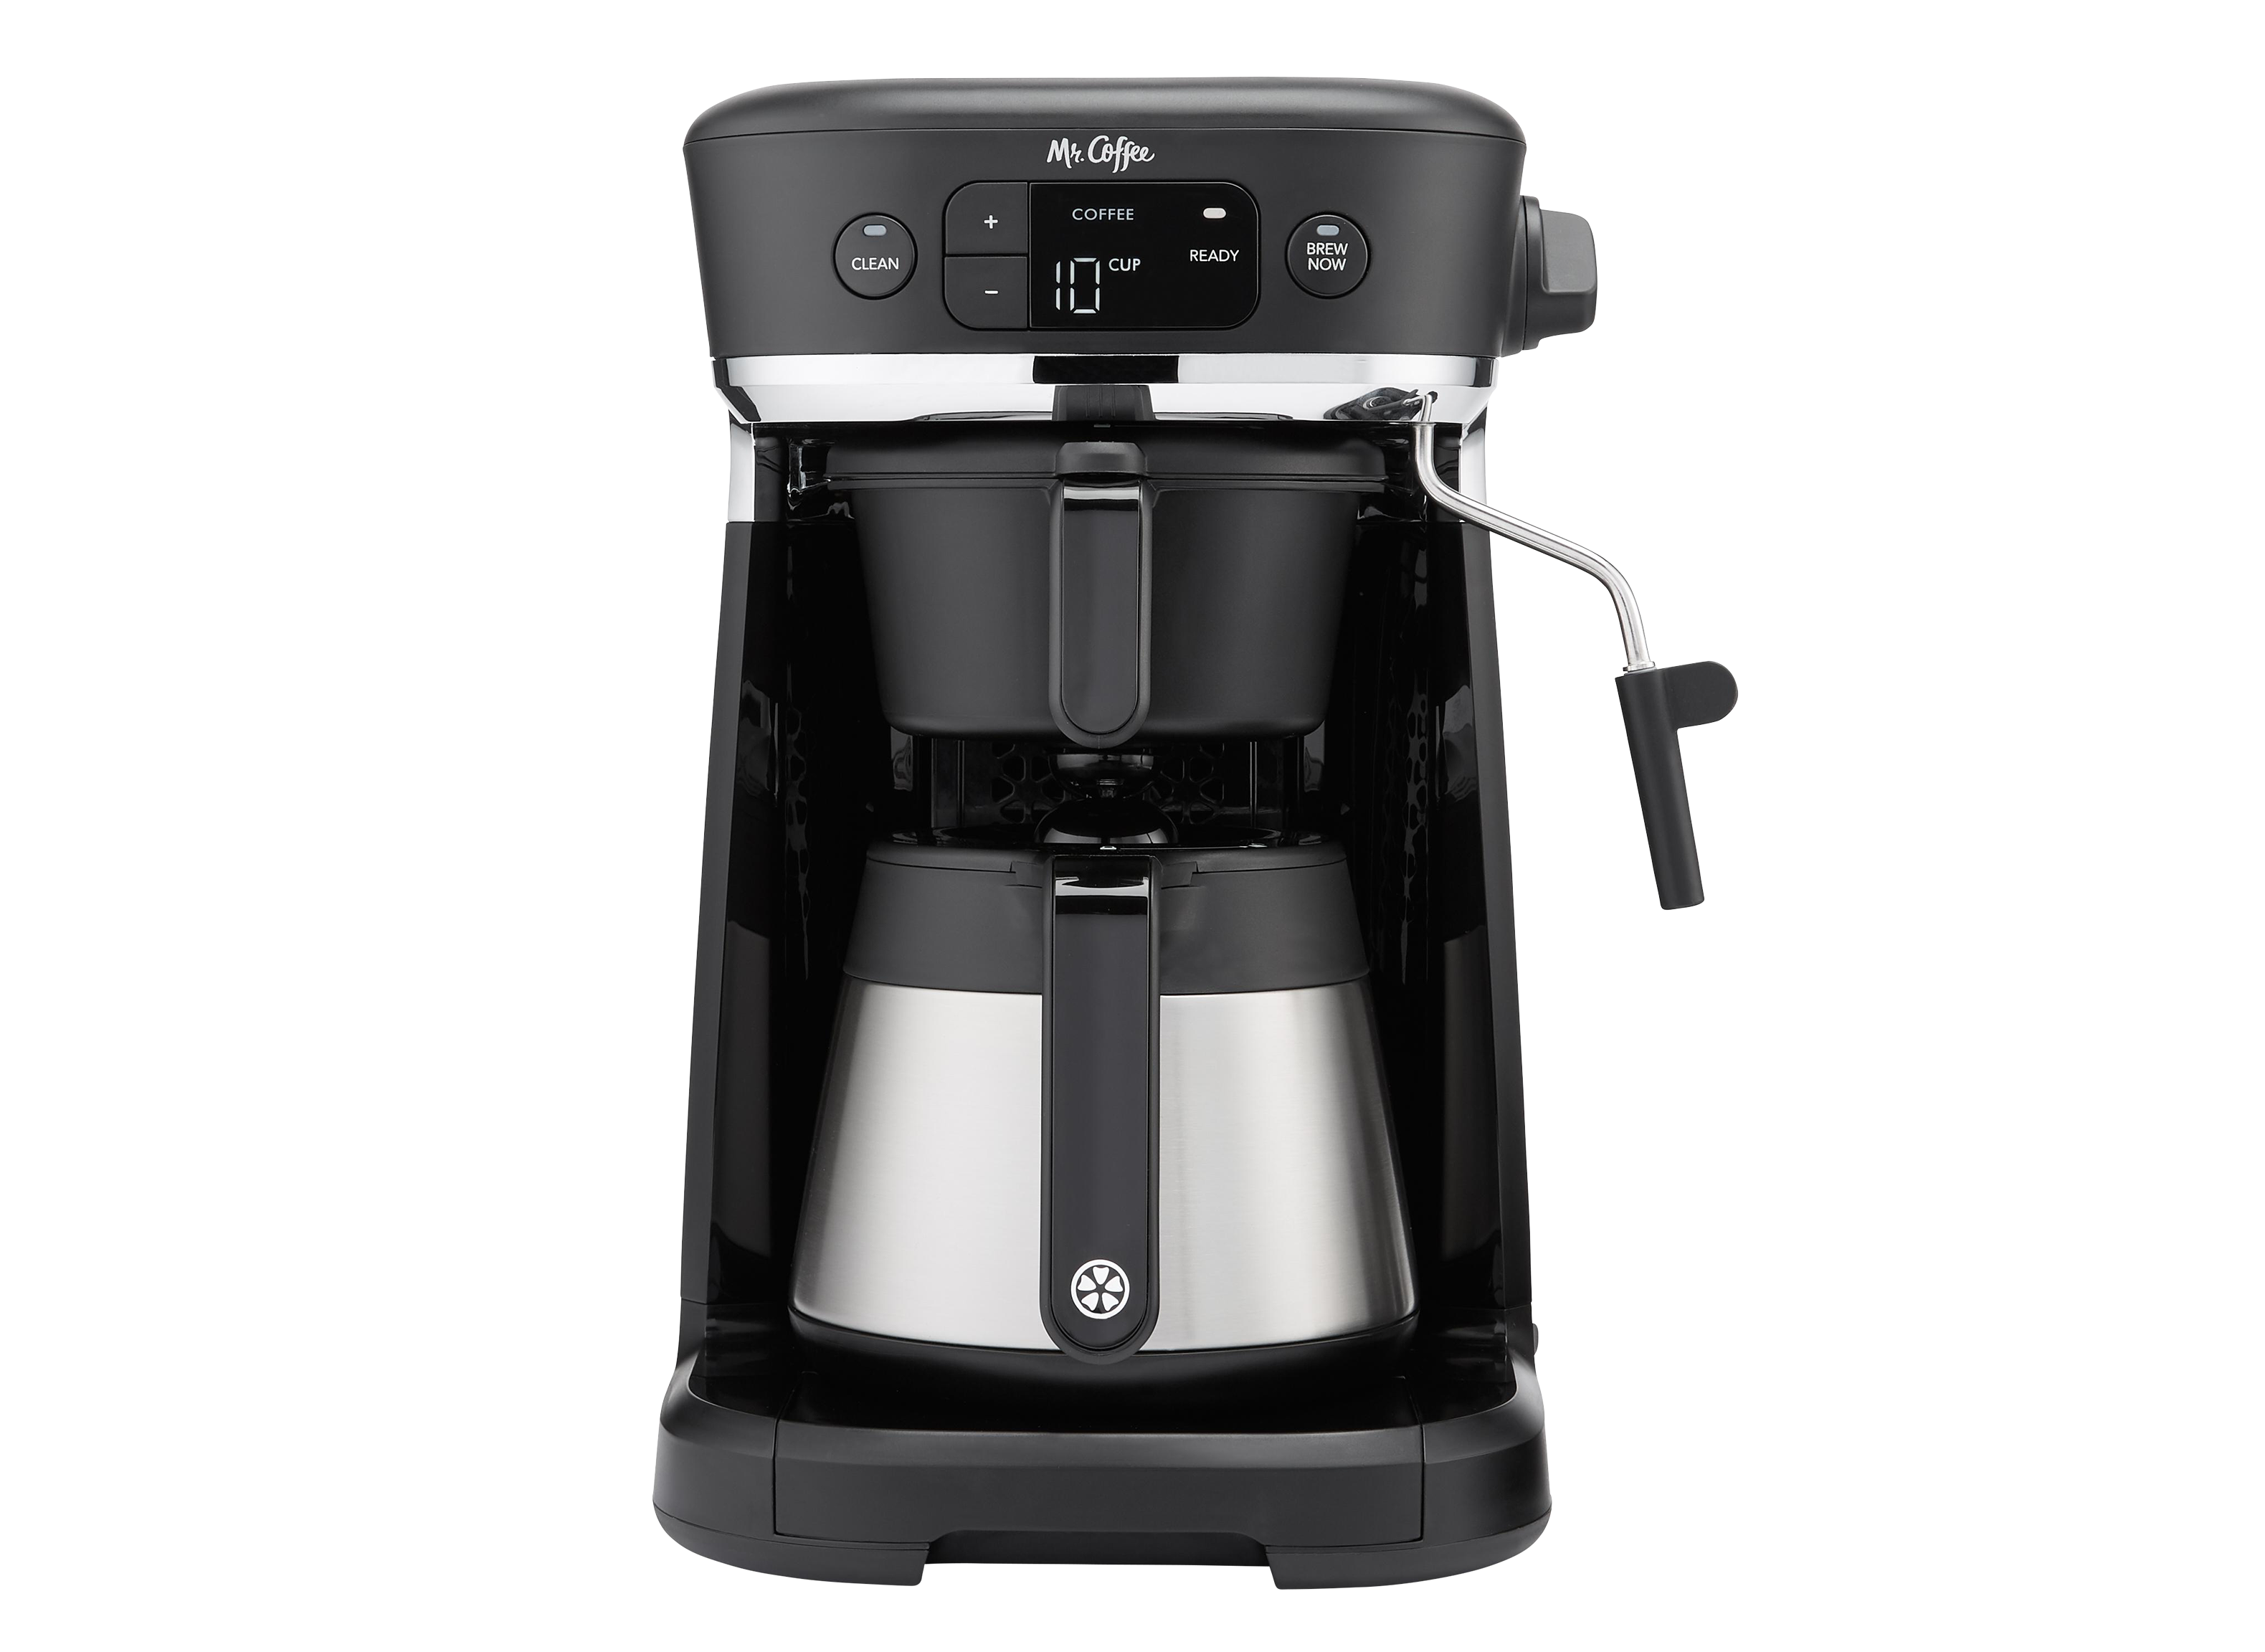 https://crdms.images.consumerreports.org/prod/products/cr/models/400235-drip-coffee-makers-with-carafe-mr-coffee-occasions-bvmc-o-ct-10009495.png